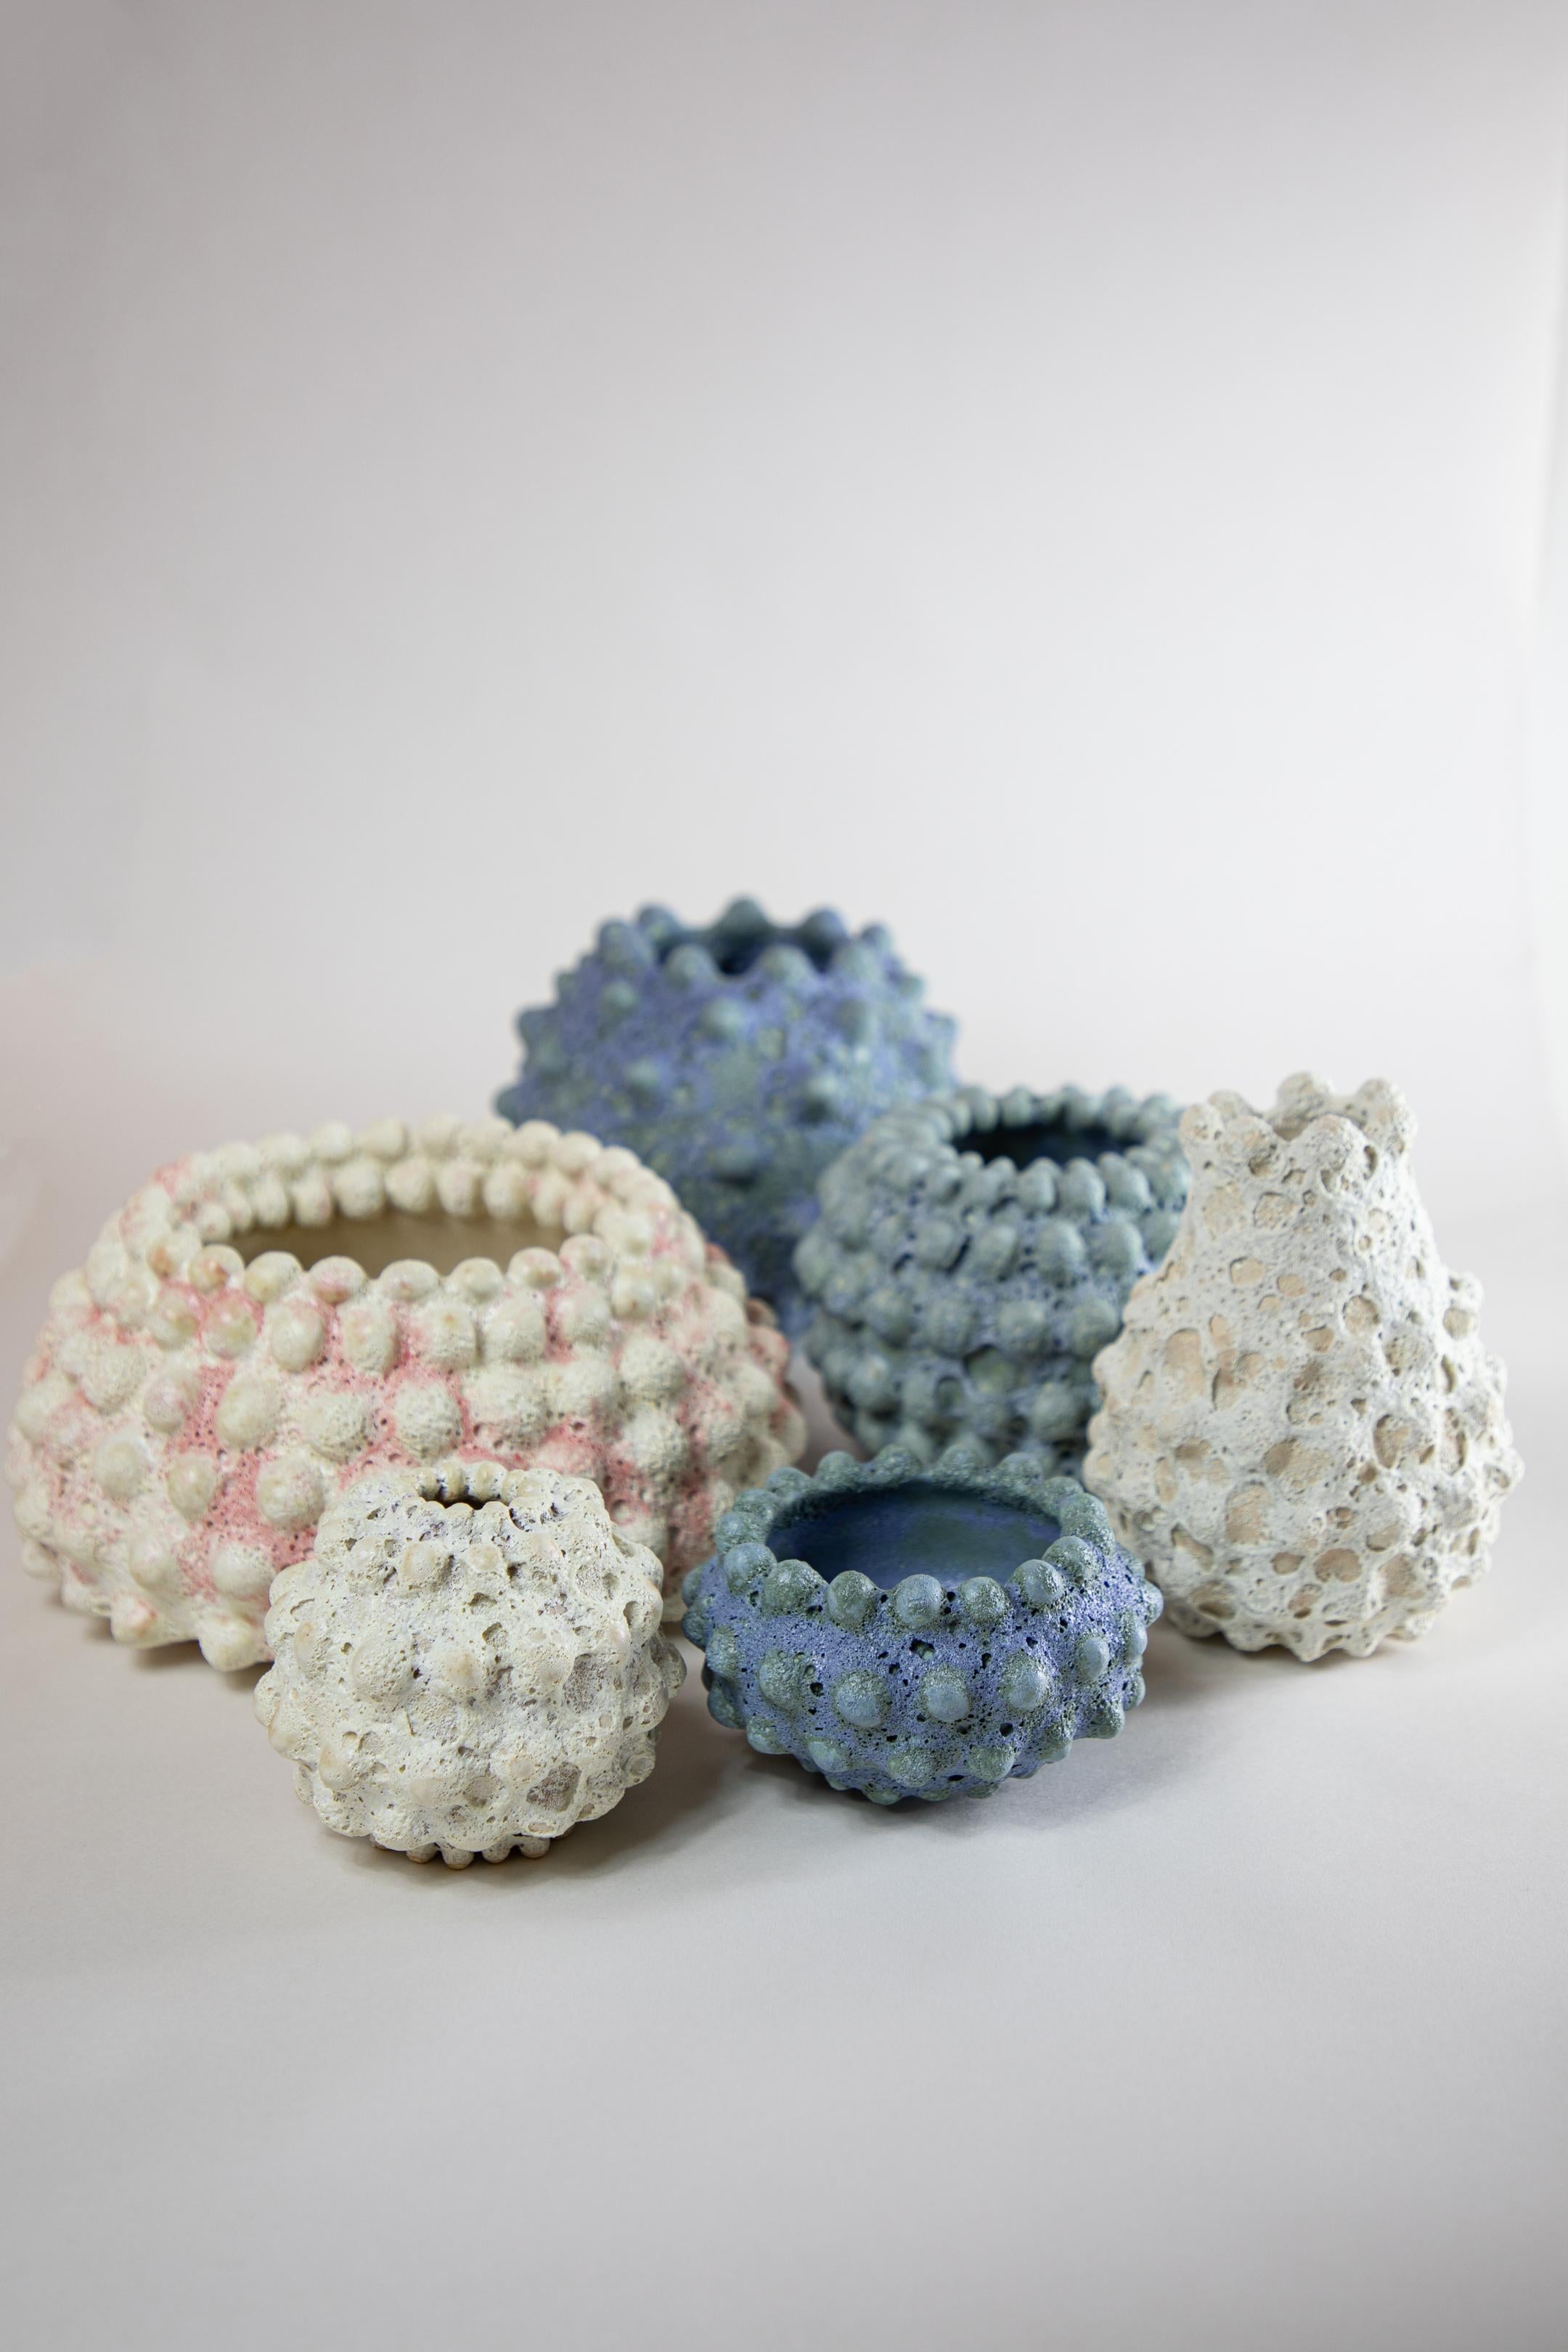 Object 2 Atlantis Collection by Angeliki Stamatakou
One of a kind, 2022
Dimensions: H16 x W11 cm.
Materials: Stoneware, handmade glaze.
Colors: blue, pink, ivory.

Angeliki Stamatakou is a ceramics artist based in Athens, Greece. She studied